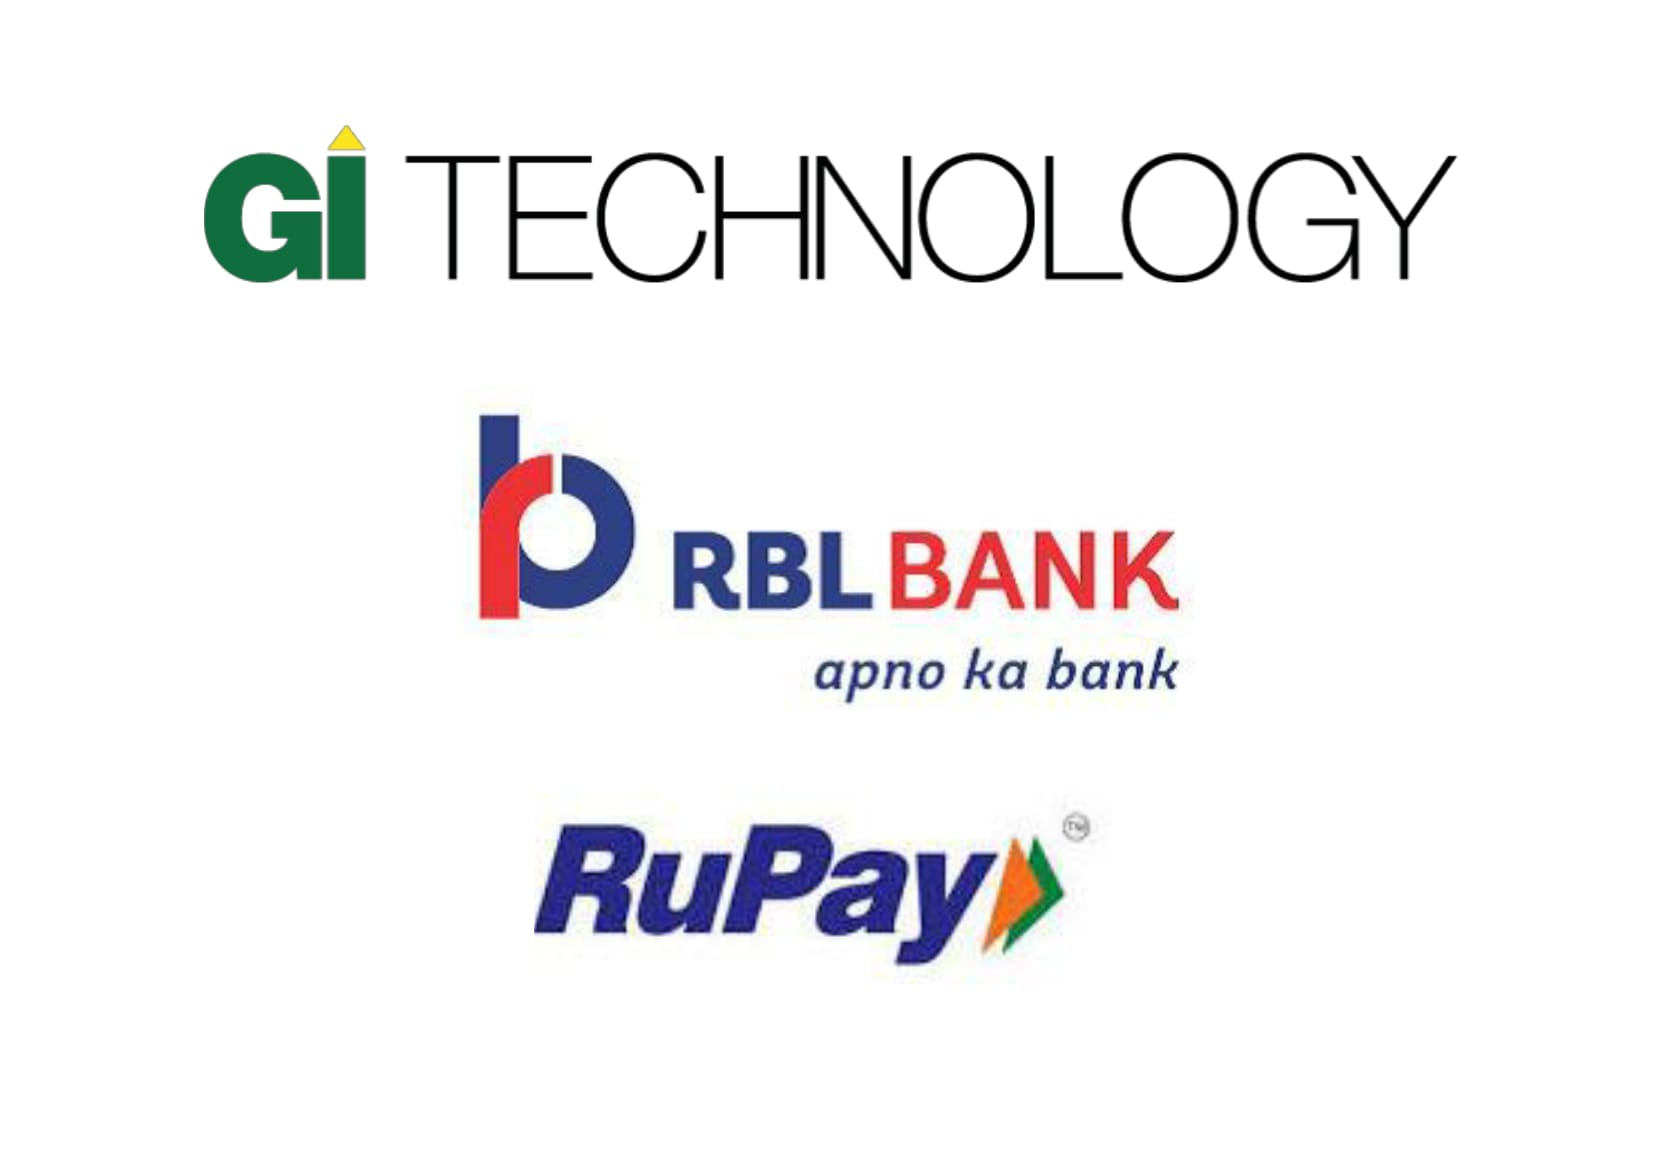 RBL Bank Partners With Wirecard's Subsidiary GI Technology to Launch Open Loop RuPay Prepaid Card